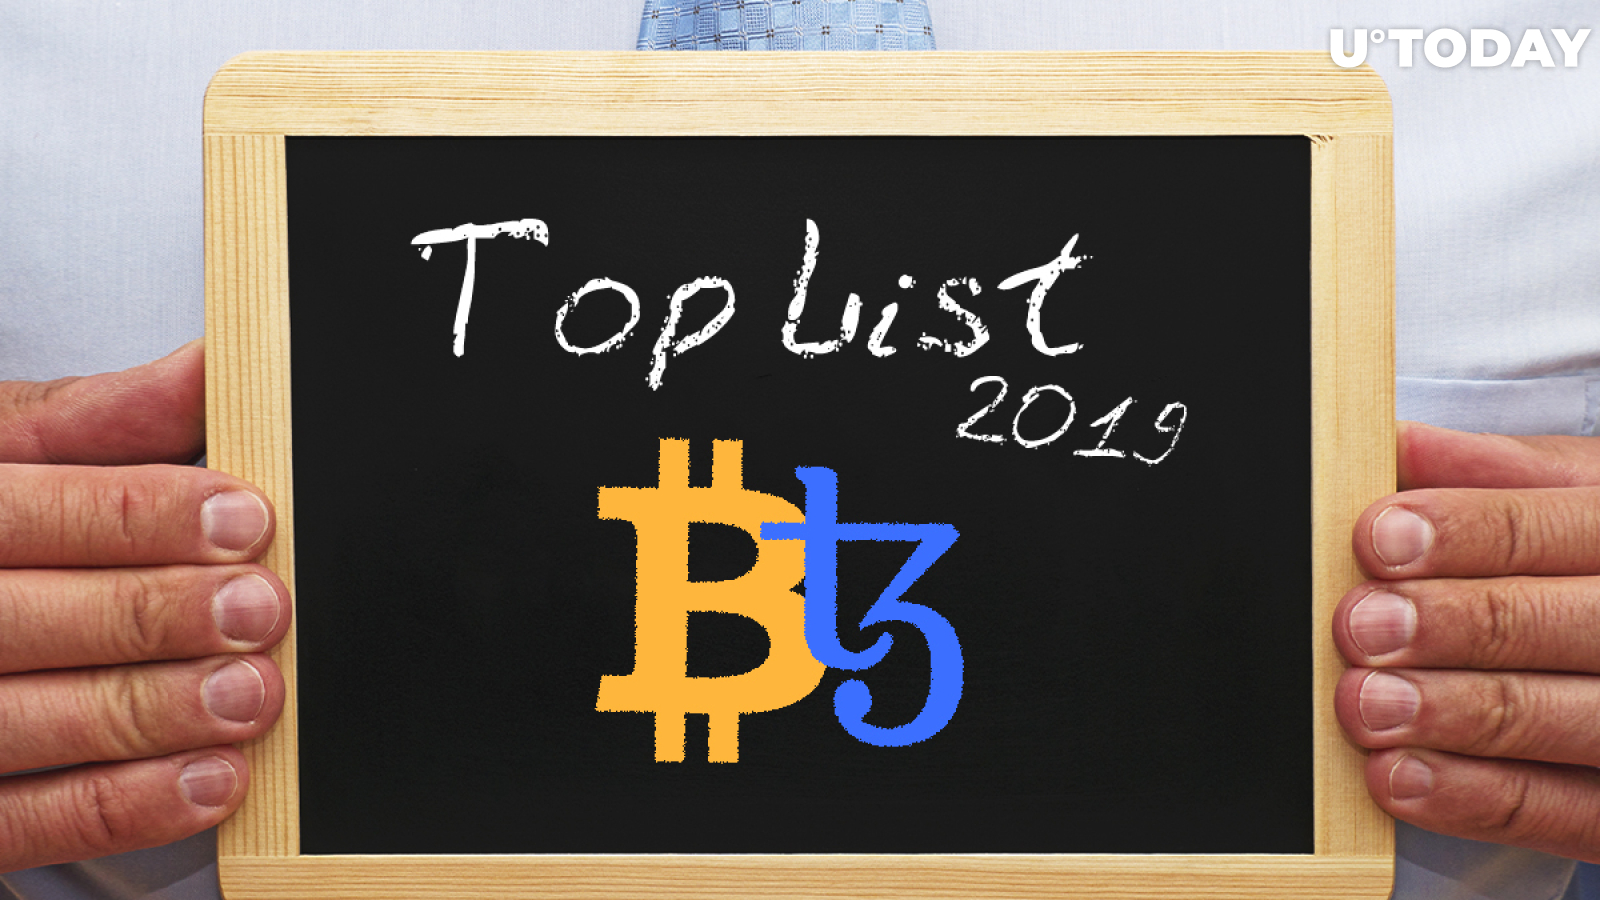 Tezos (XTZ) and Bitcoin (BTC) Have Outperformed Other Major Cryptos in 2019